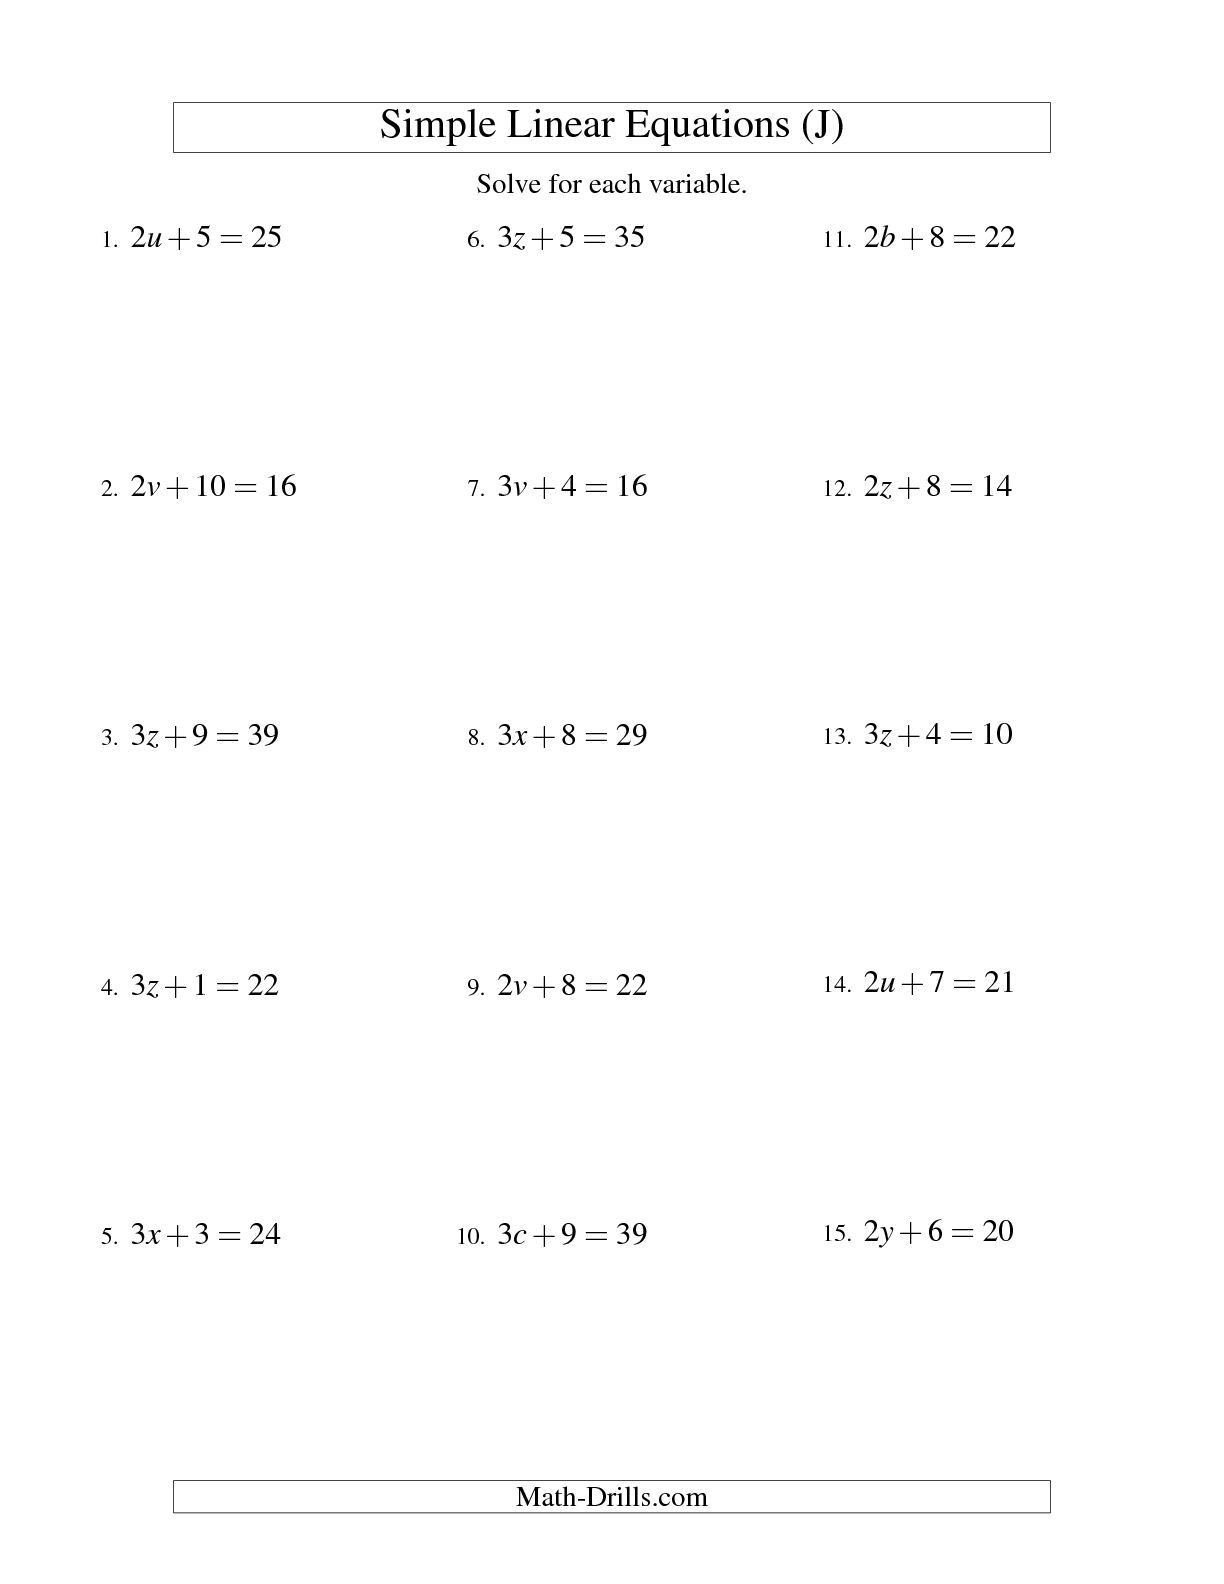 Systems Of Equations Substitution Method 3 Variables Worksheet Pertaining To Systems Of Equations Substitution Method 3 Variables Worksheet